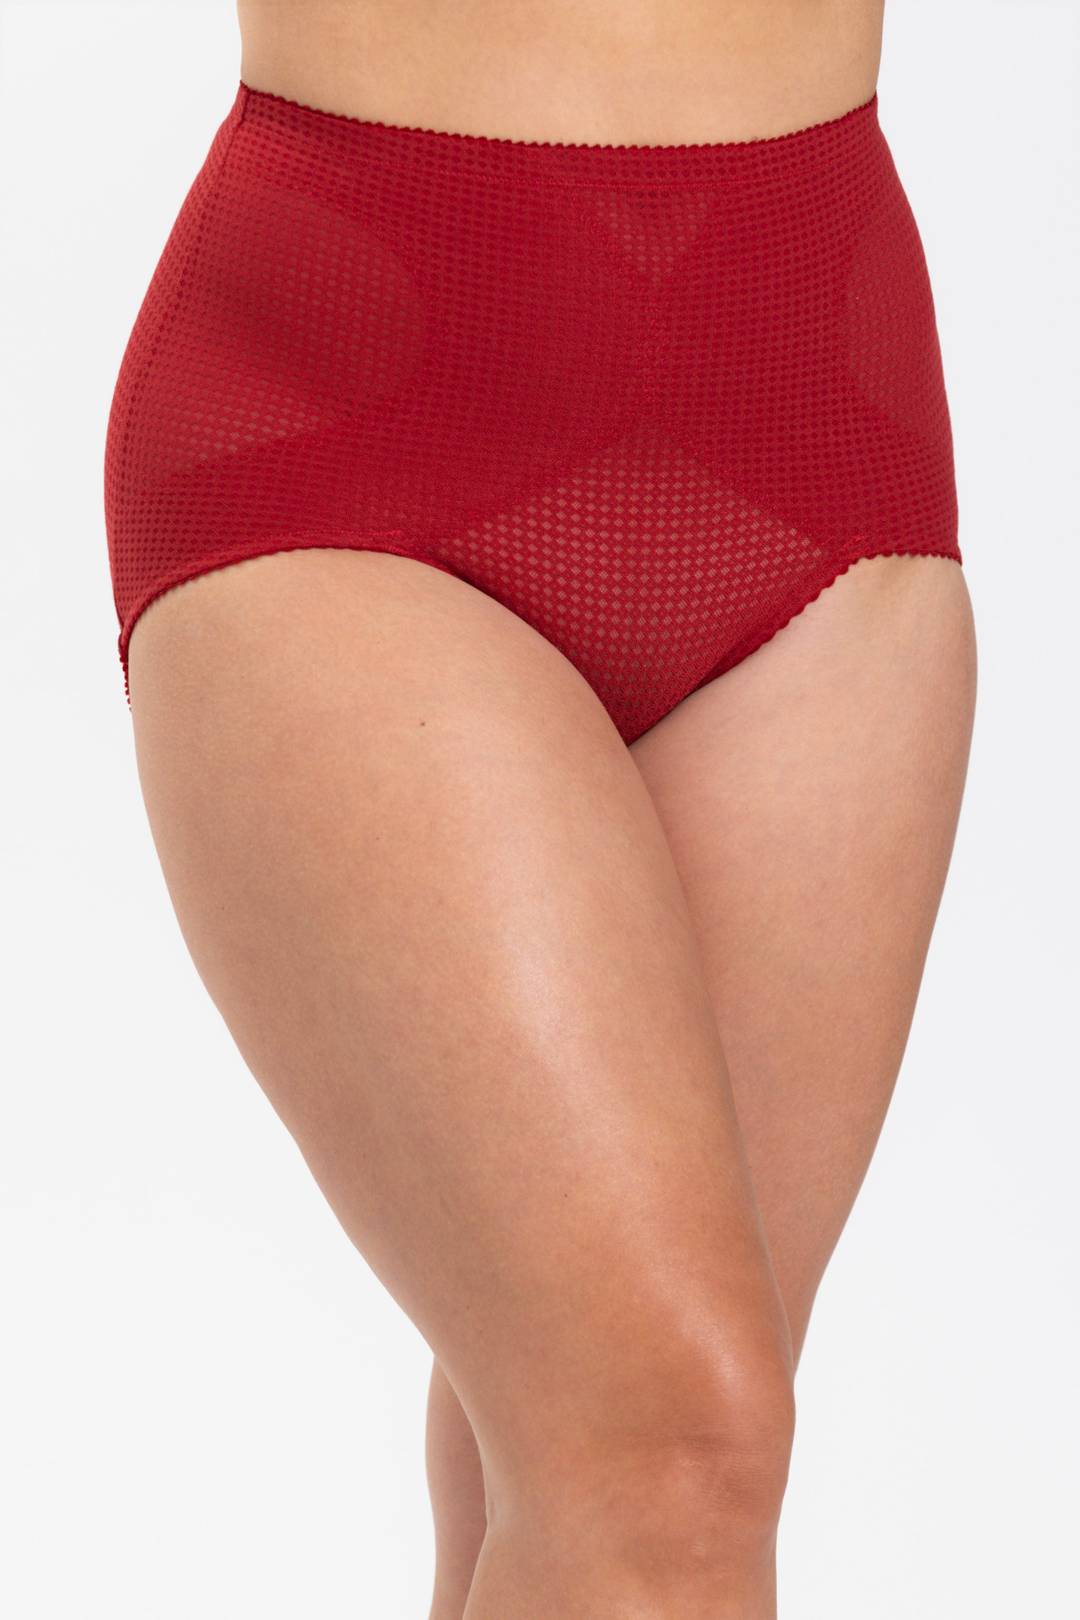 Rose panty girdle - Gently shaping panty girdle in comfortable  micro-quality fabric - Miss Mary